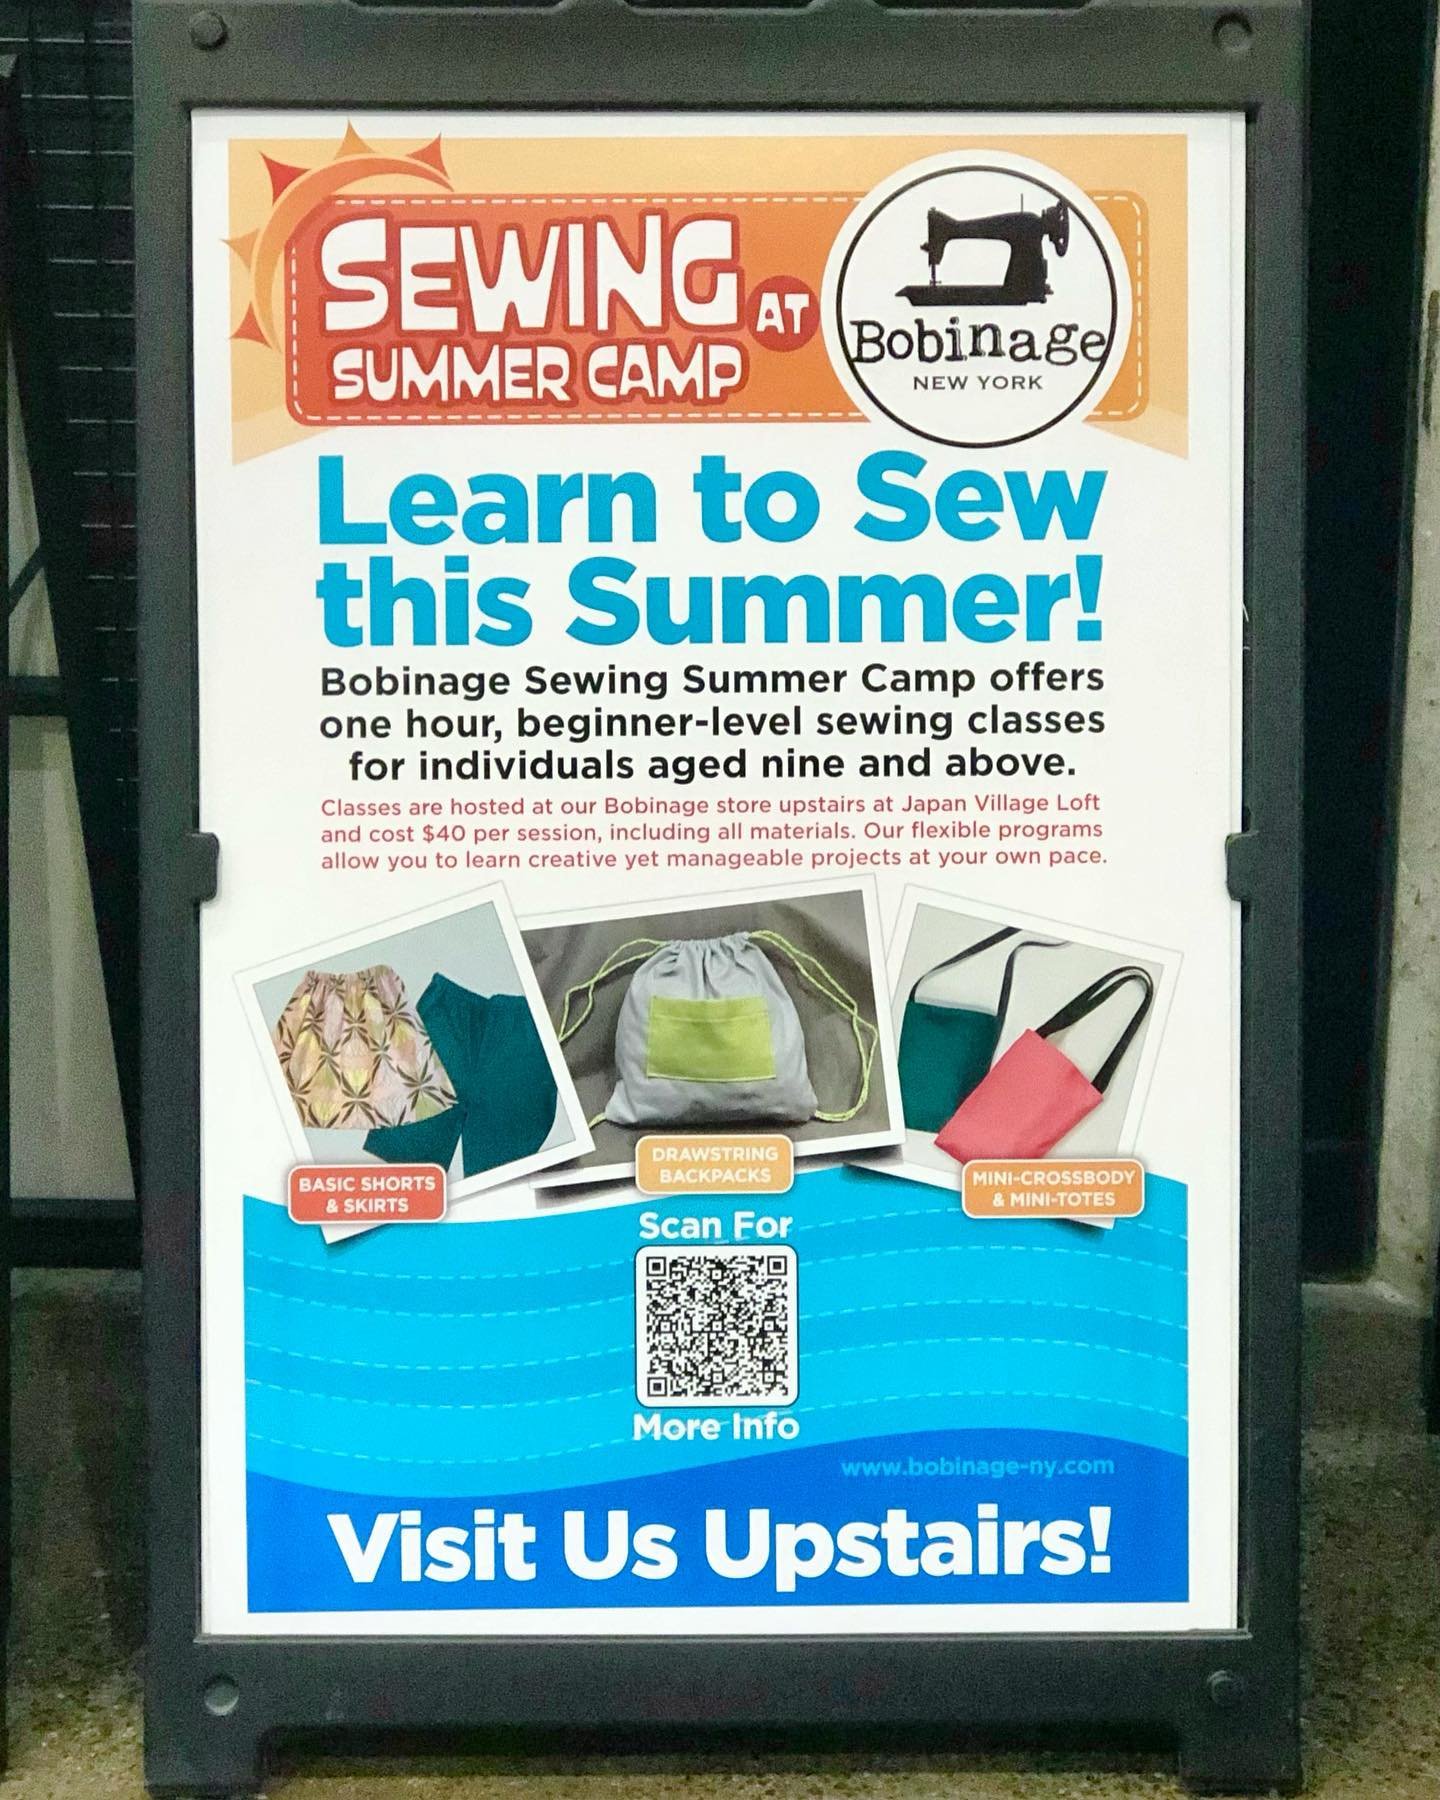 Bobinage will offer Summer Sewing Classes available June 20th until Labor Day for ages 9 and older. You will learn to operate the Janome Sewist 740DC sewing machine and complete a project within the hour. For more fun and learning you can select back